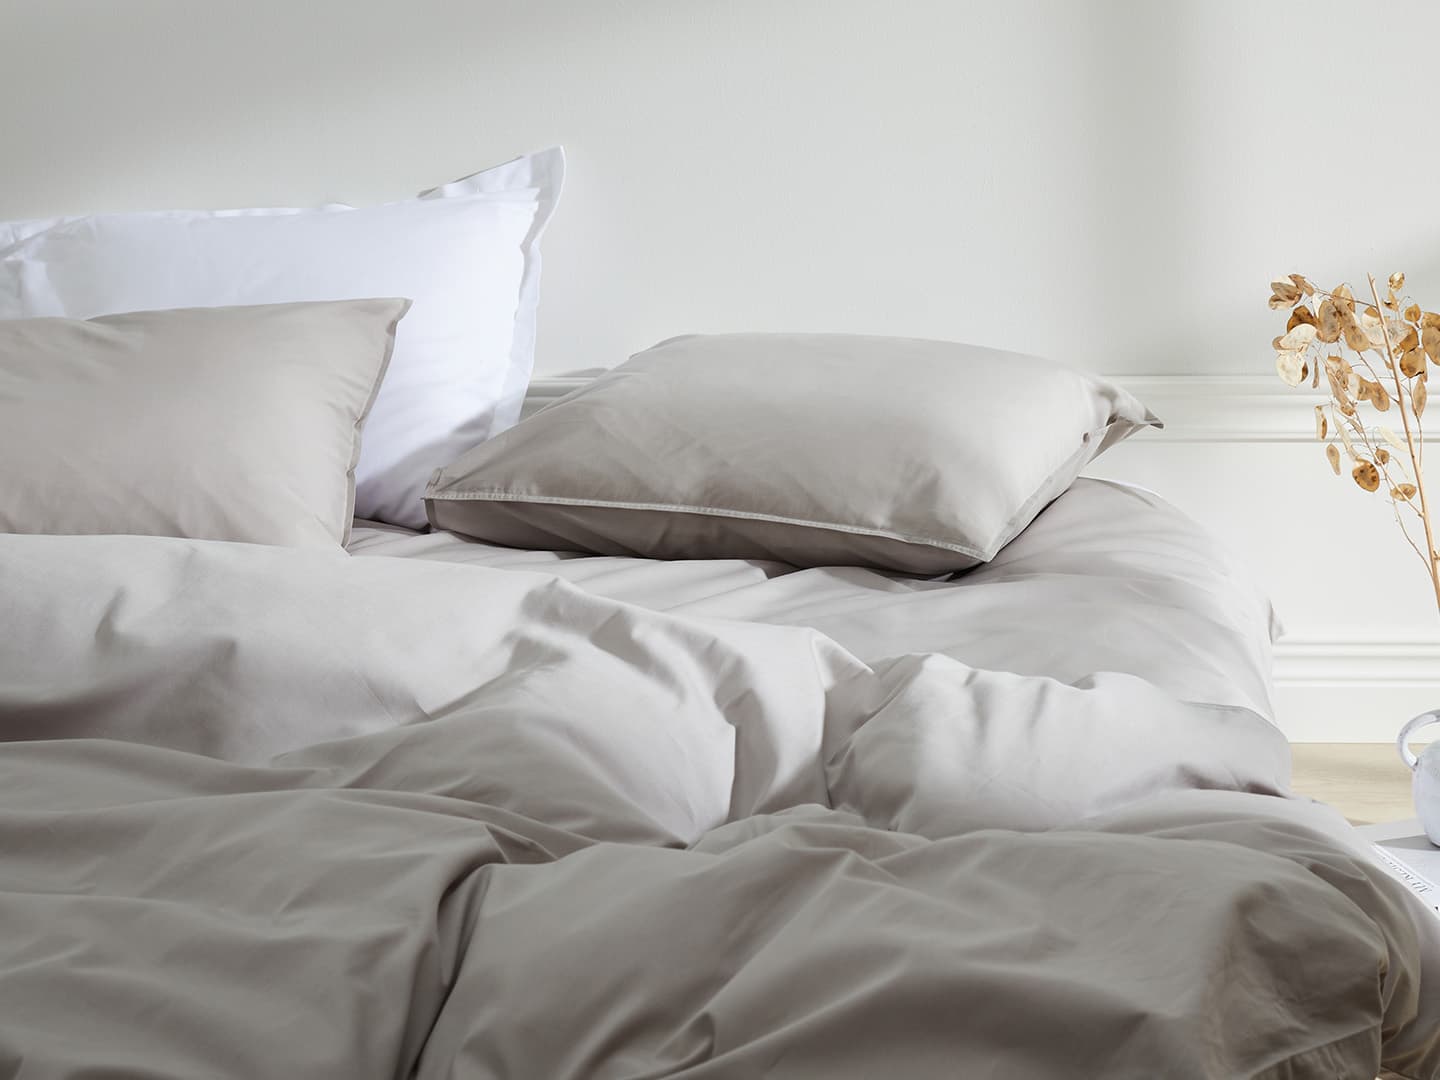 Duvet Cover Nejd - Khaki Grey in the group Bedding / Duvet Covers at A L V A (1196)